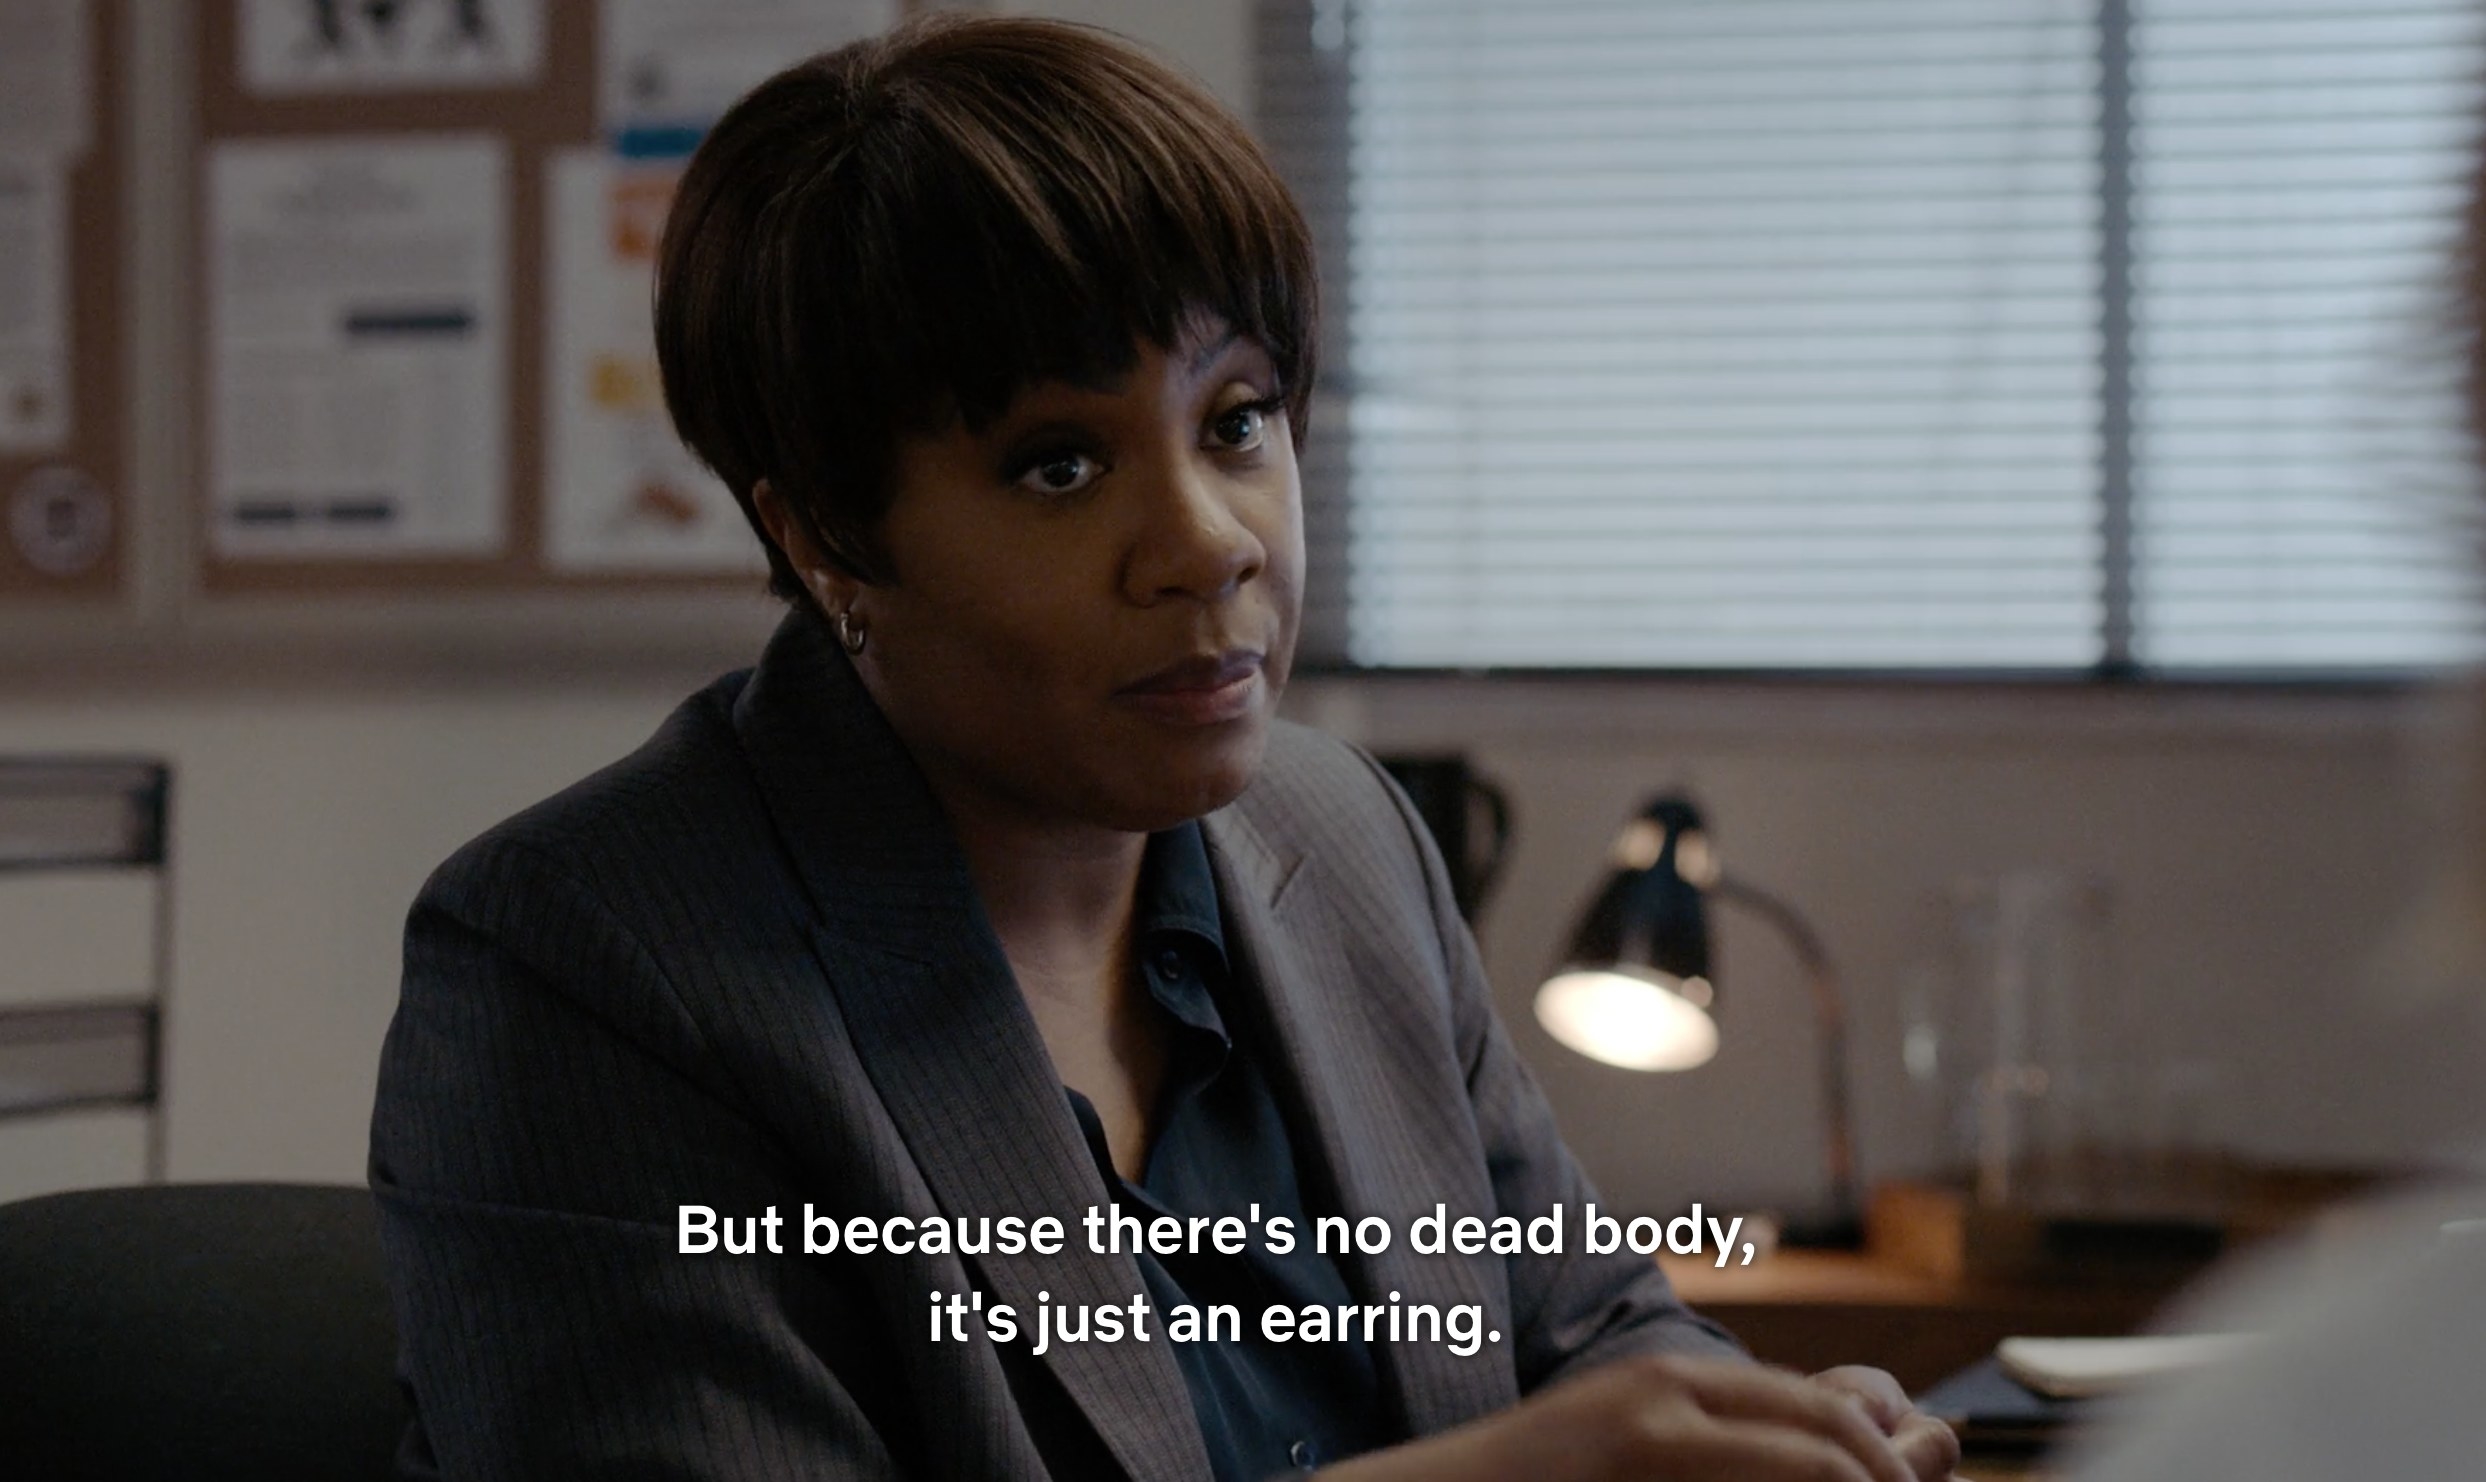 A female detective with short hair says &quot;But because there&#x27;s no dead body, it&#x27;s just an earring&quot;